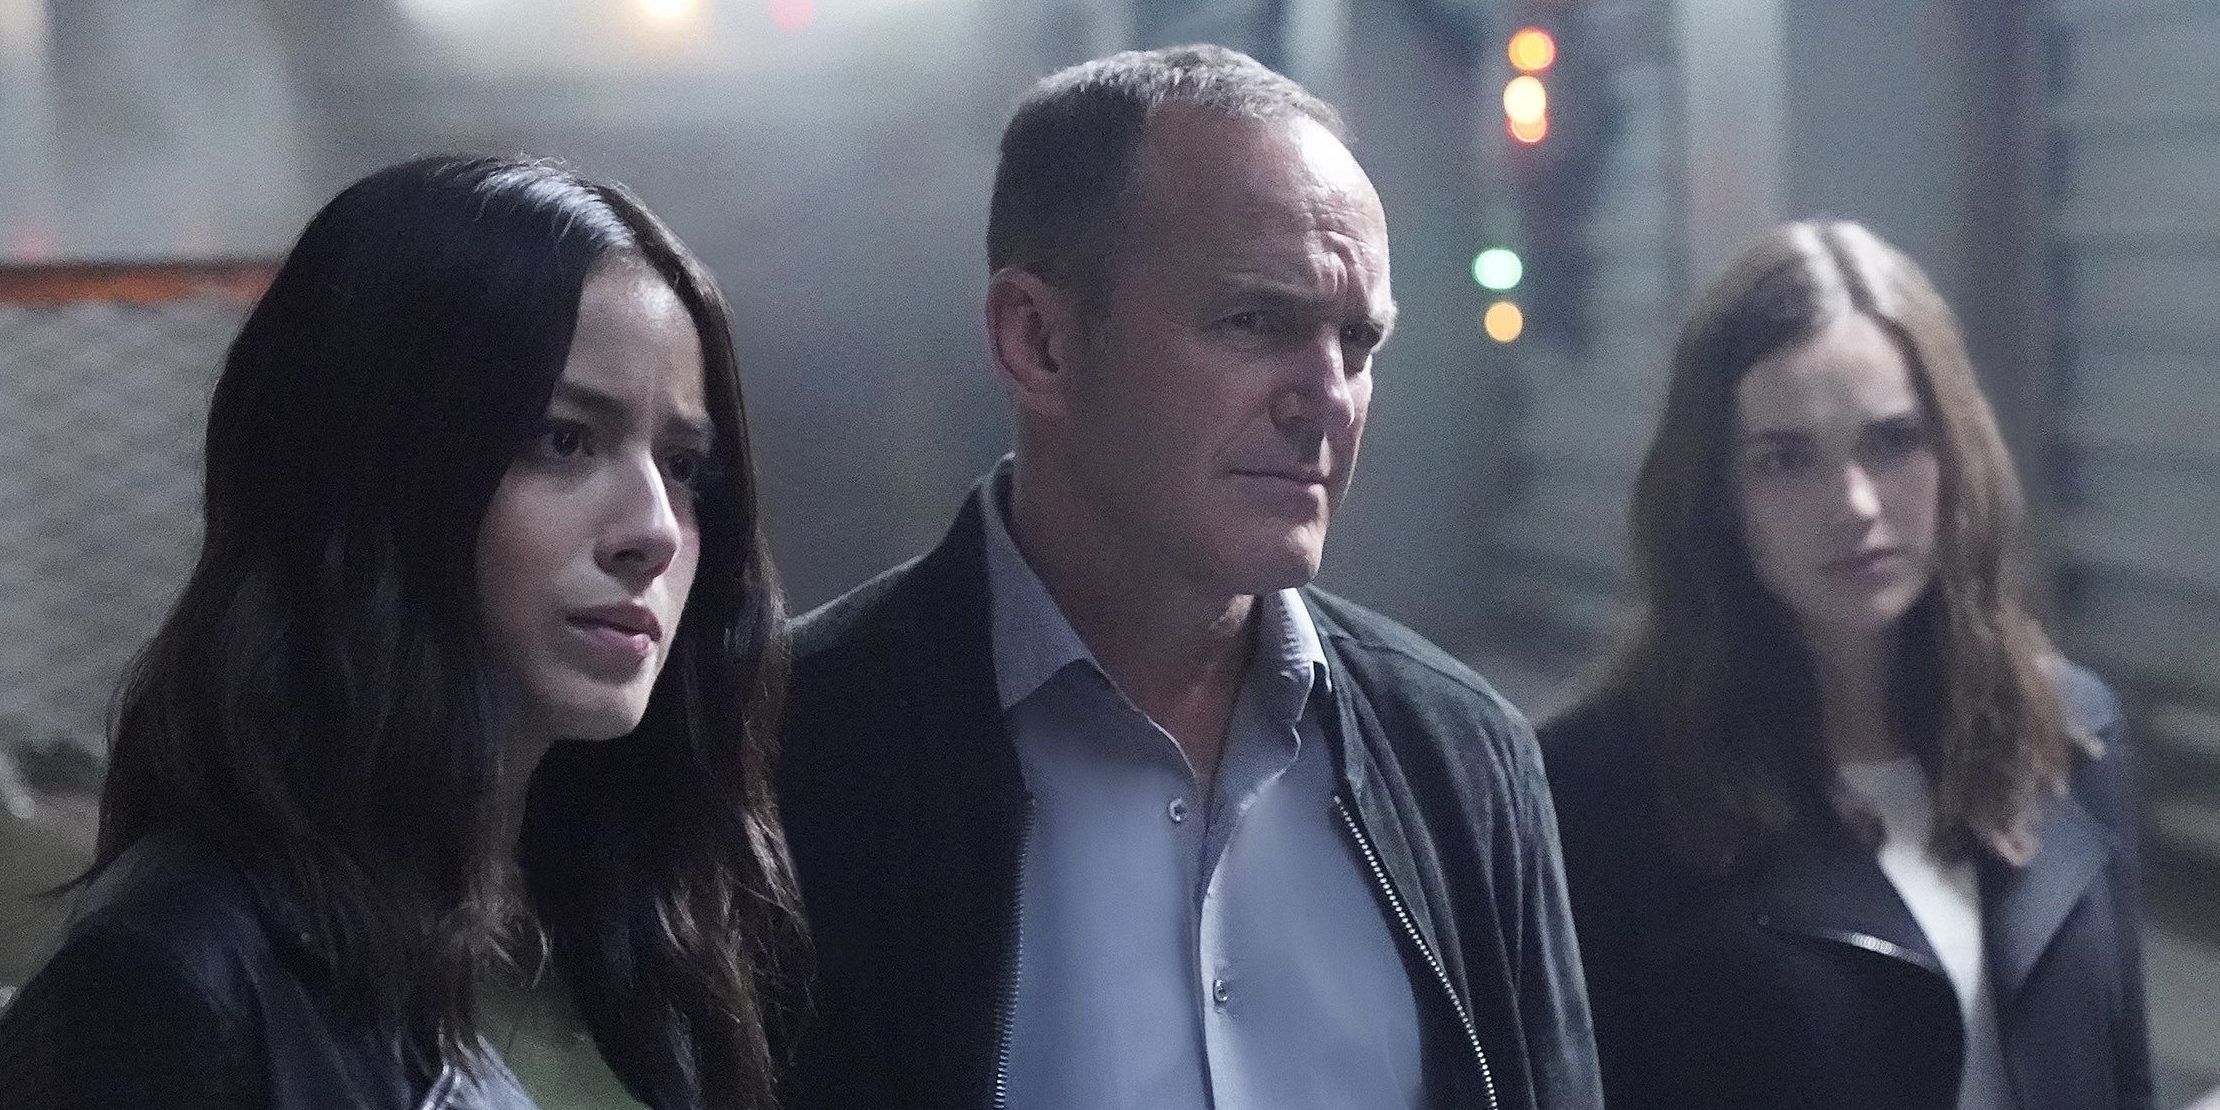 Chloe Bennet as Daisy Quake Johnson, Clark Gregg as Phil Coulson and Elizabeth Henstridge as Jemma Simmons in Agents of SHIELD